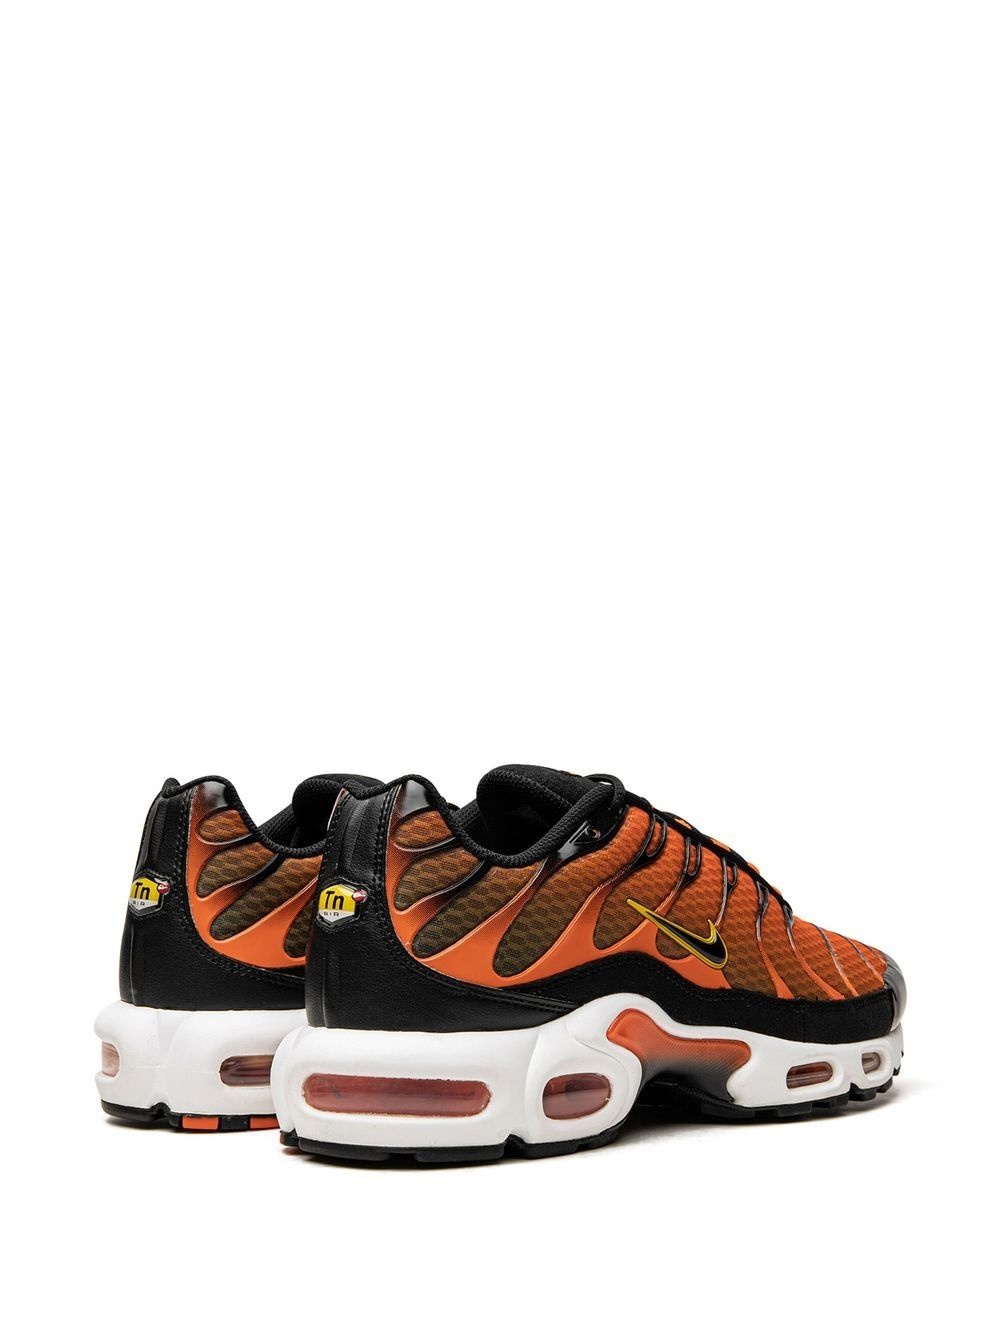 Air Max Plus "Safety Orange/University Gold" sneakers - 3